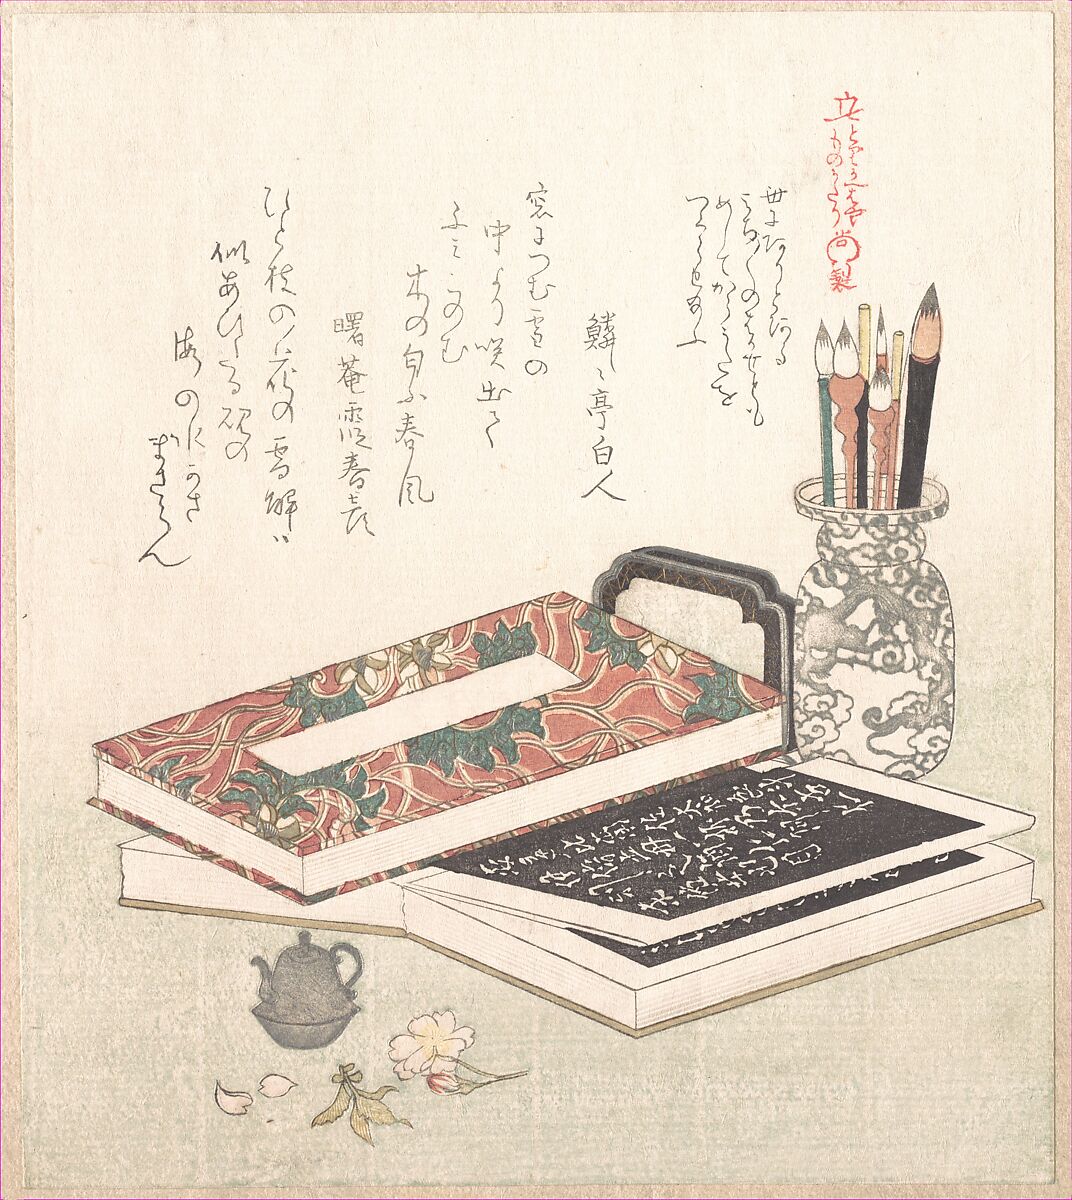 Books and Brush-Stand, Kubo Shunman (Japanese, 1757–1820), Woodblock print (surimono); ink and color on paper, Japan 